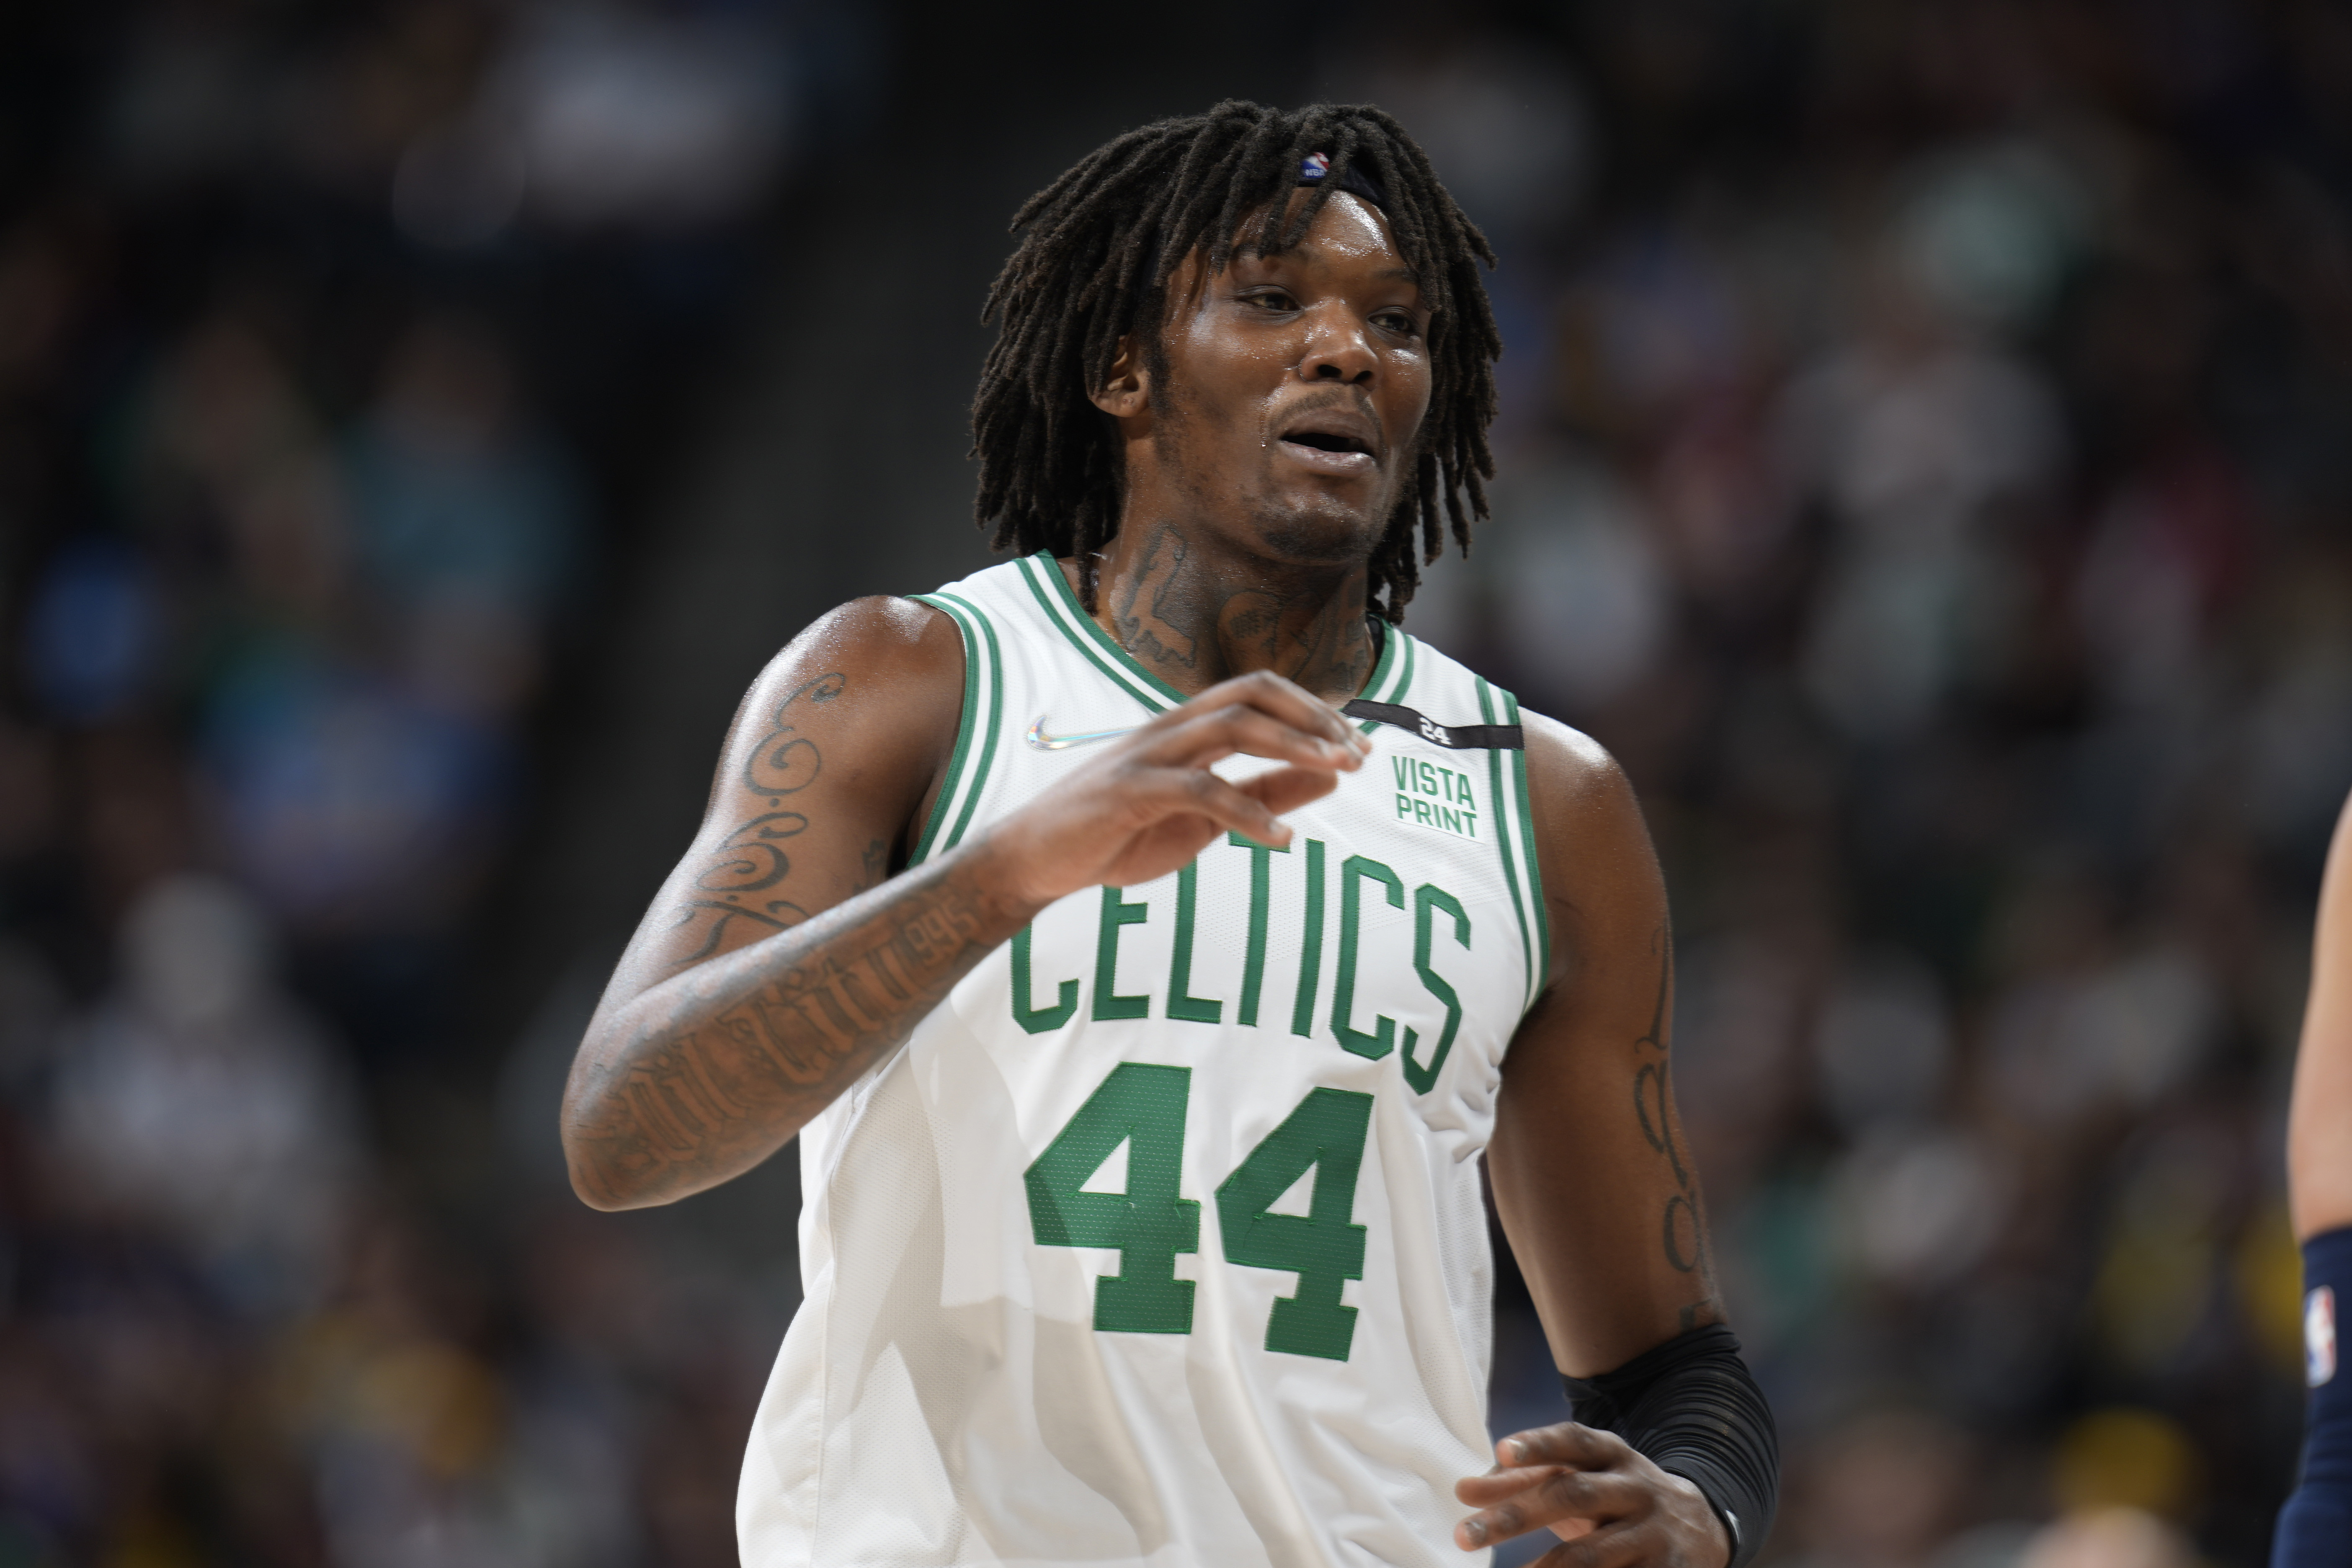 Robert Williams injury: What are the Celtics' options for the roster?